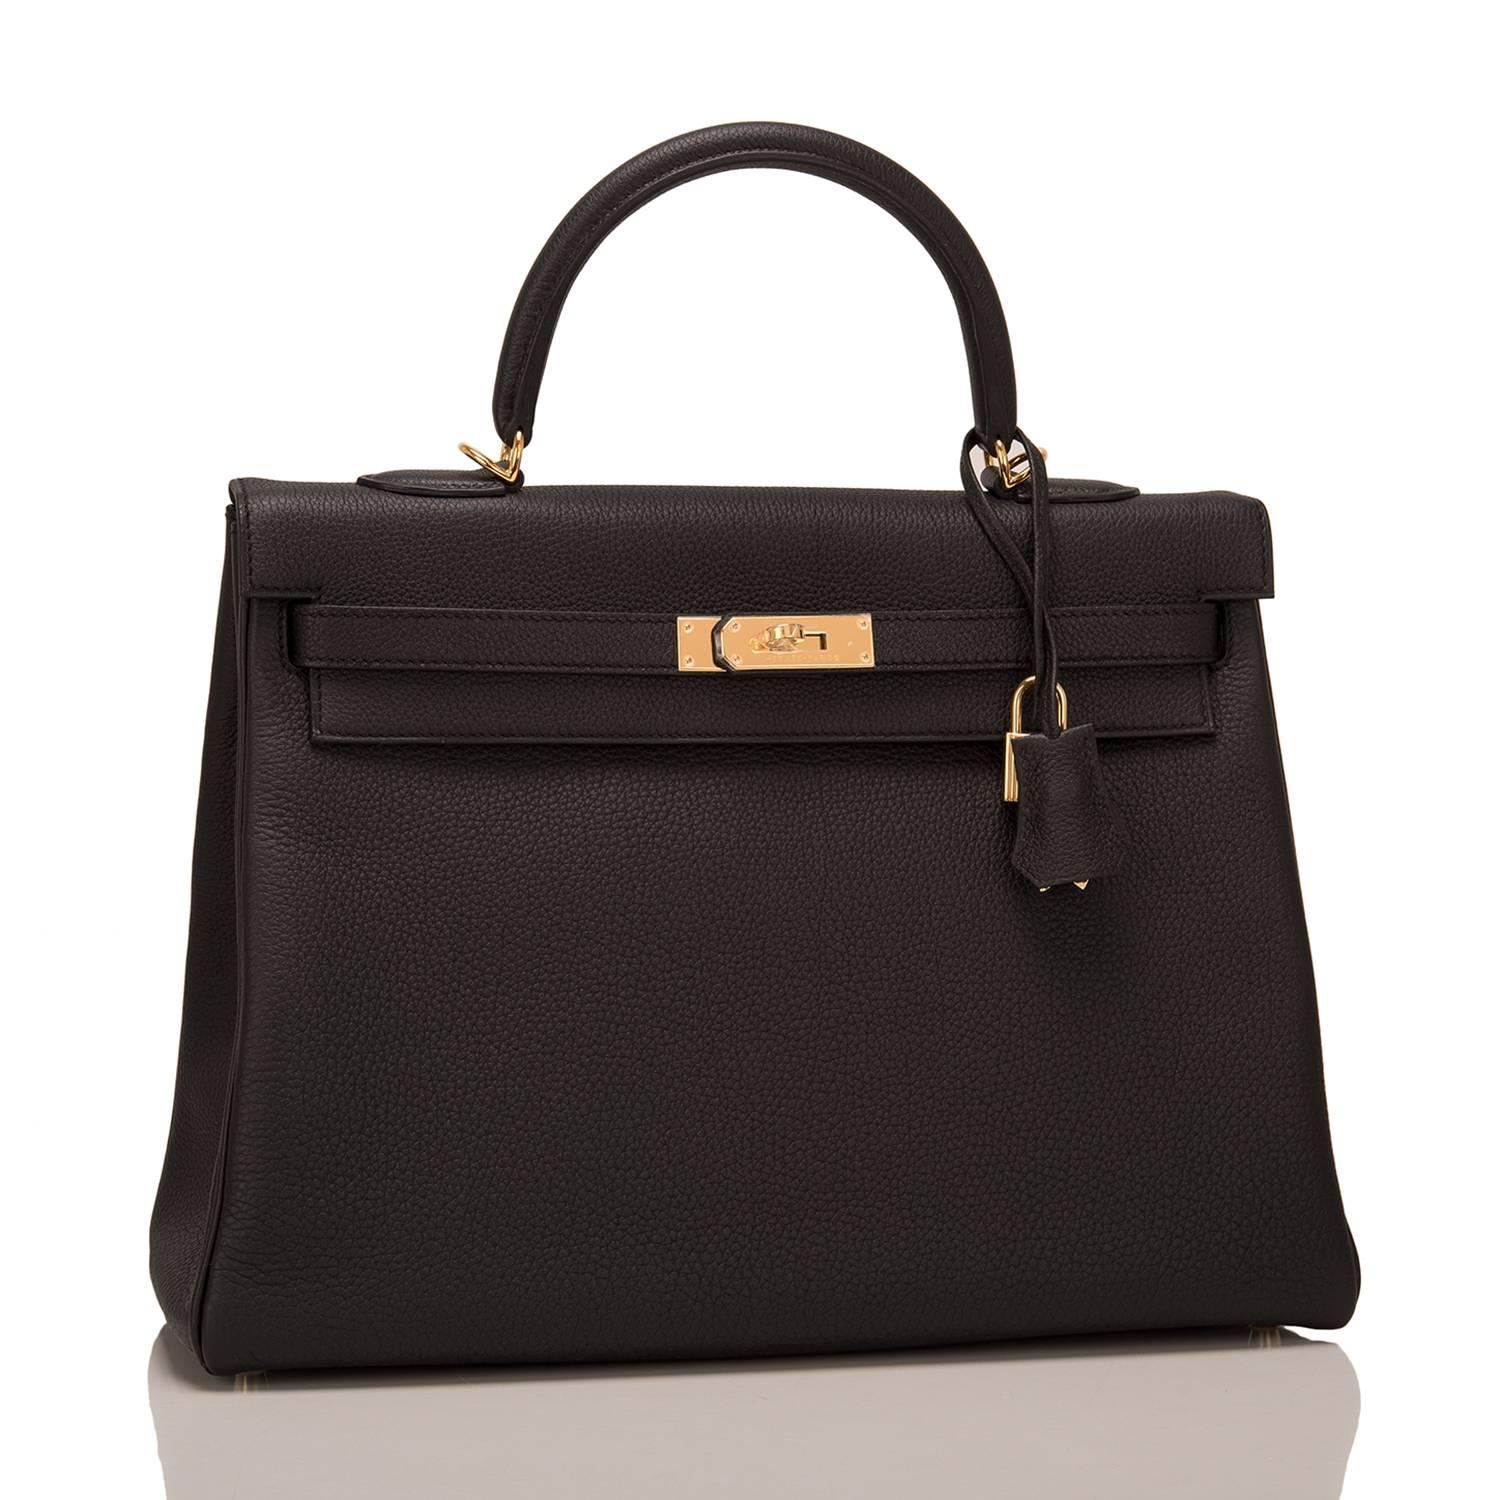 Hermes Black Kelly 35cm of togo leather with gold hardware.

This Kelly, in the Retourne style, has tonal stitching, a front toggle closure, a clochette with lock and two keys, a single rolled handle, and a removable shoulder strap.

The